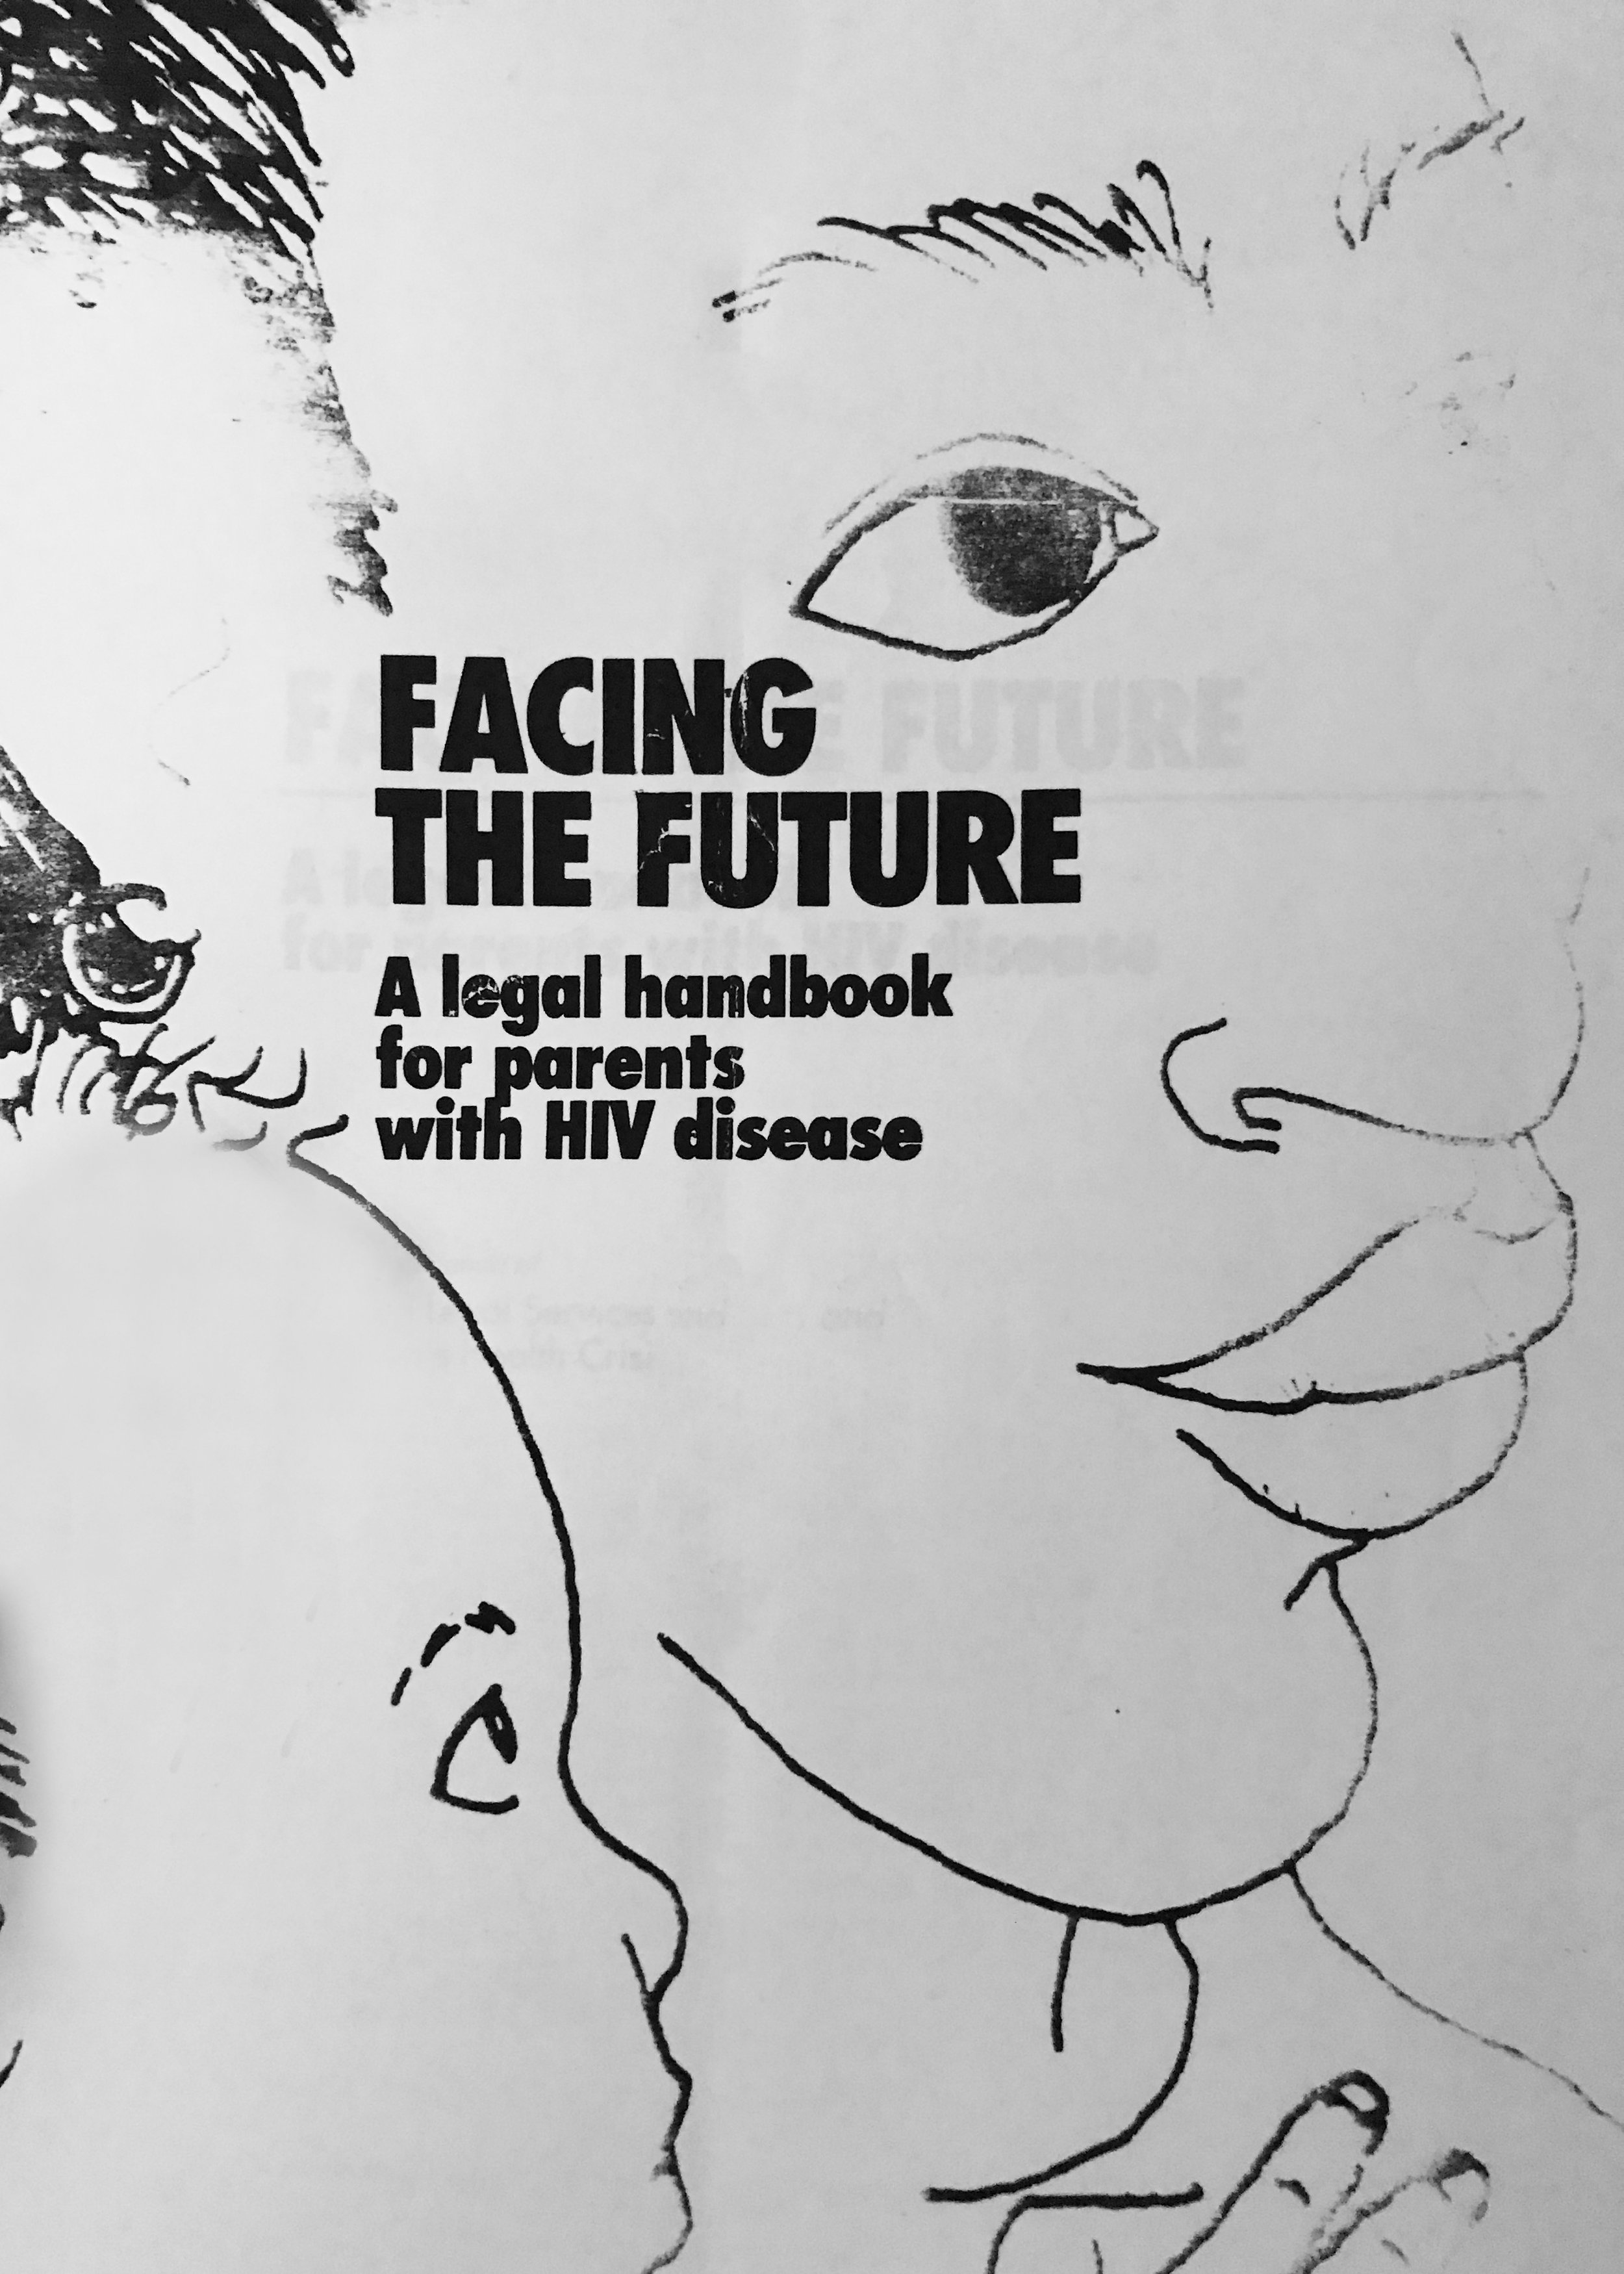 FACING THE FUTURE A Legal Handbook for prents living with HIV disease (Date Unknown).jpg